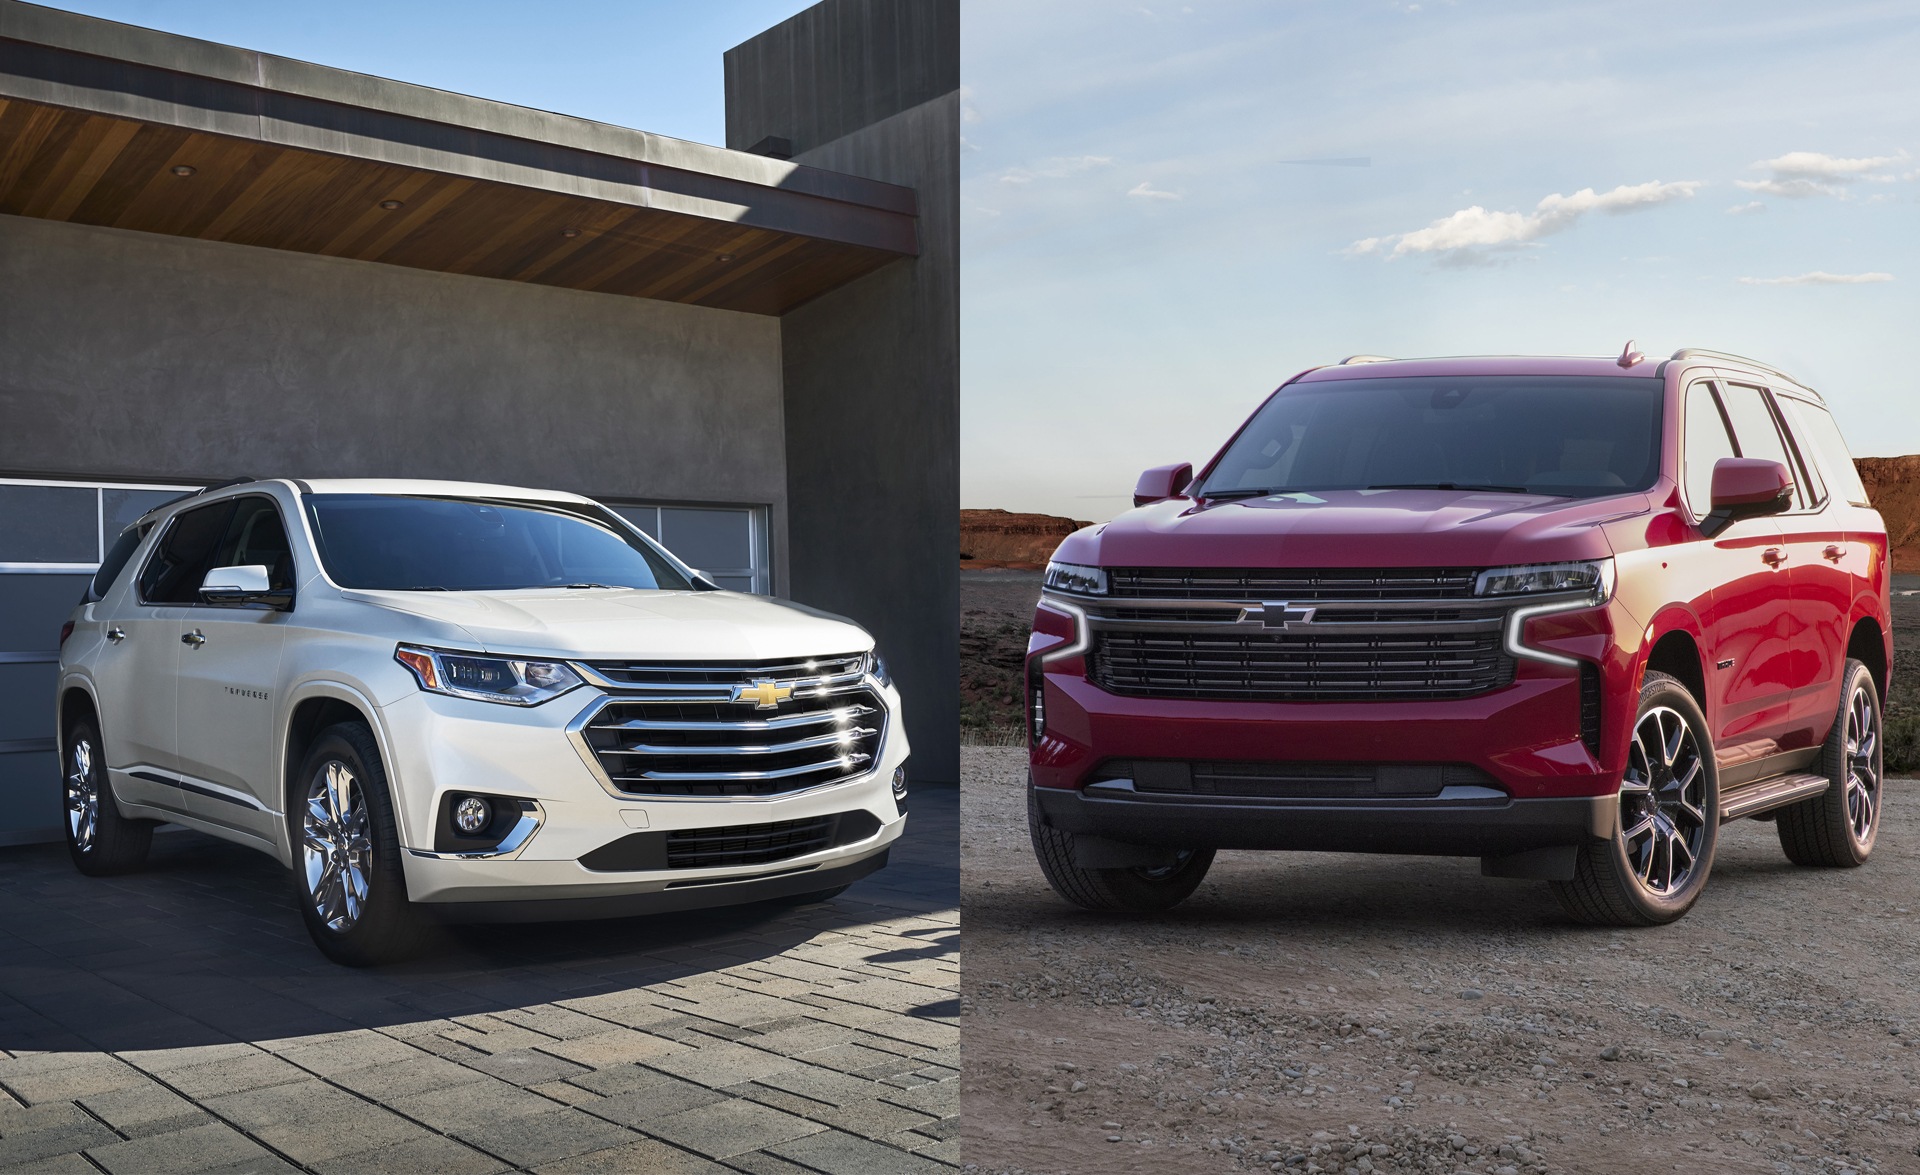 America's Fascination with Crossovers and SUVs?